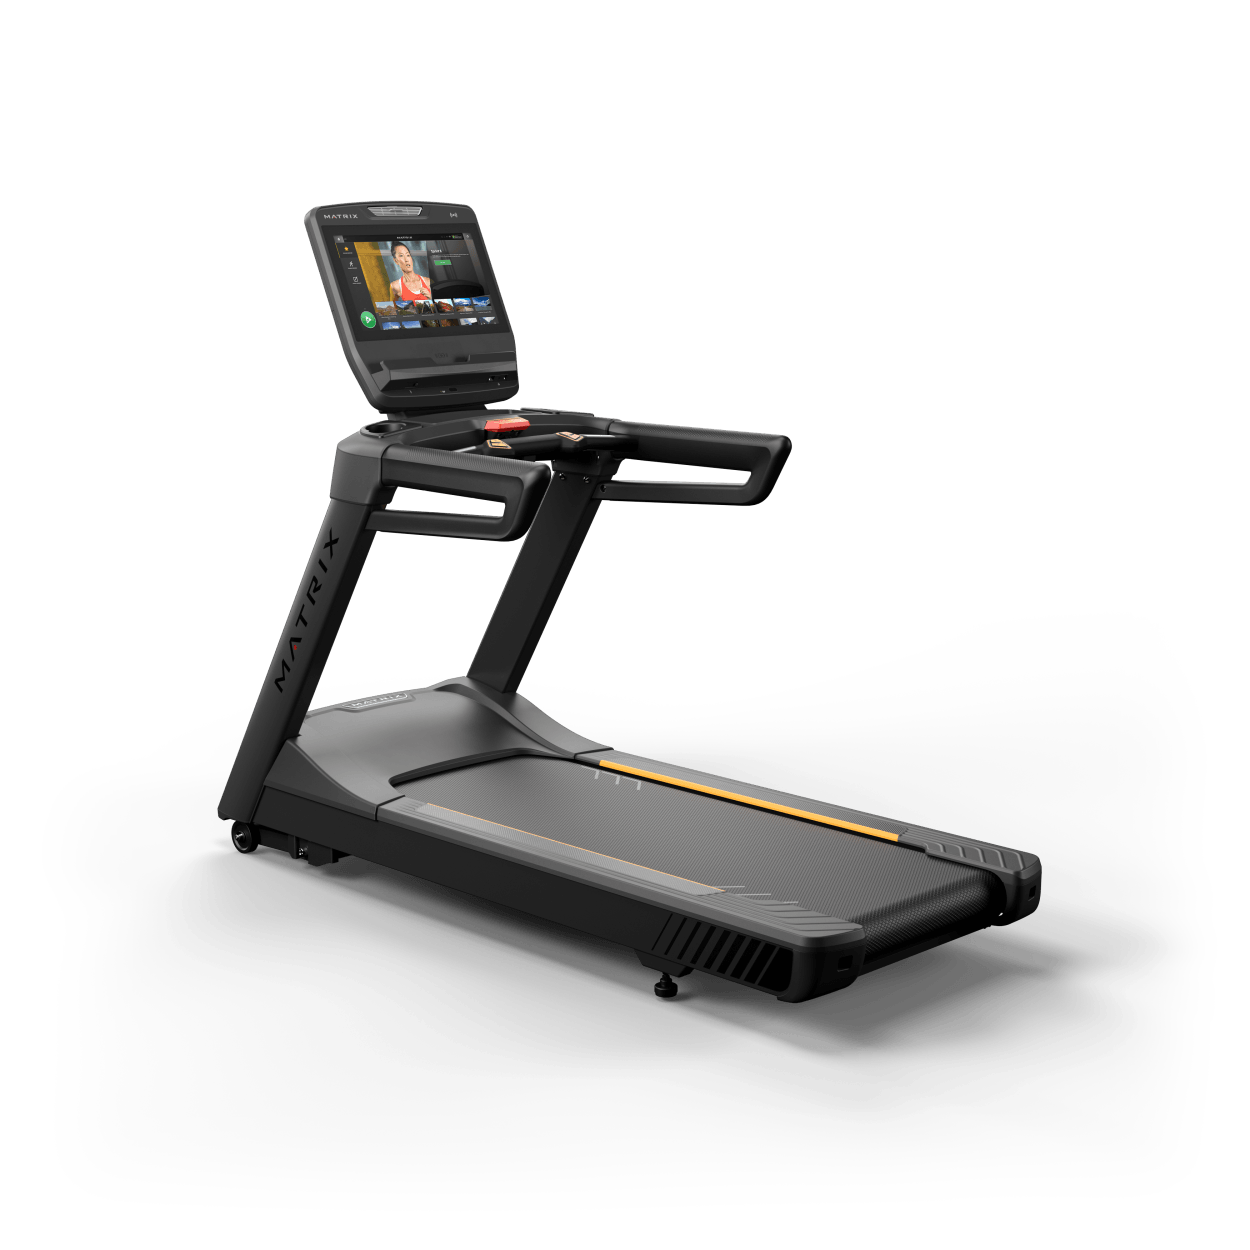 Matrix Fitness Endurance Treadmill with Touch XL Console full view | Fitness Experience